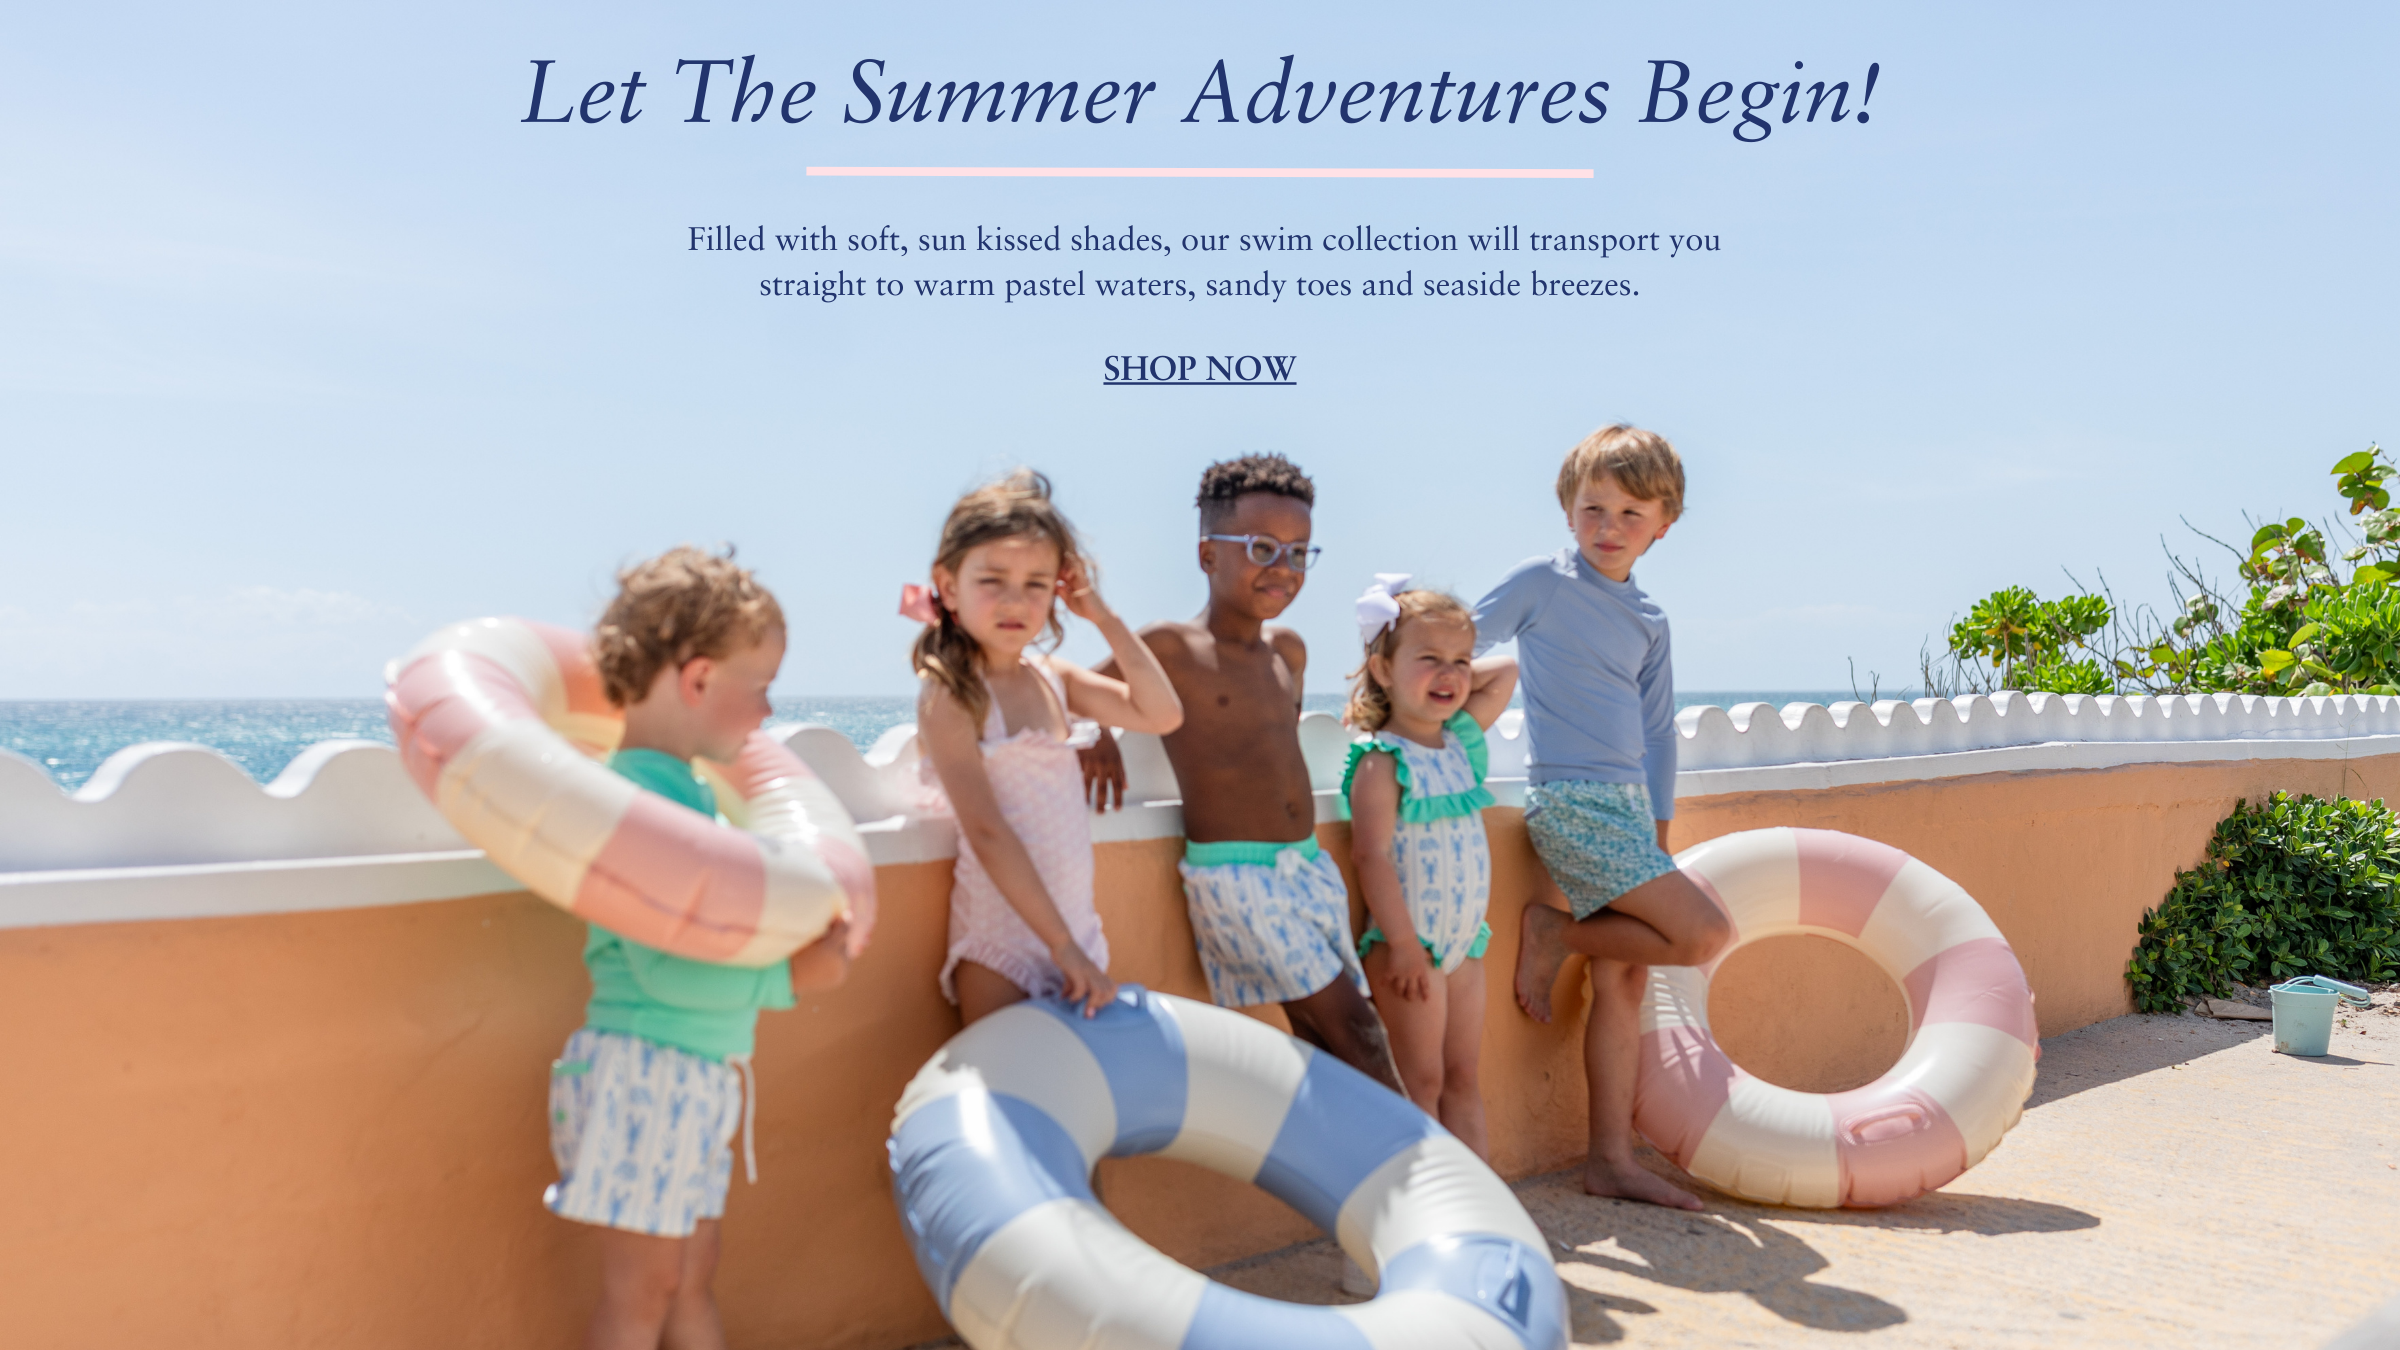 Let The Summer Adventures Begin |  Filled with soft, sun kissed shades, our swim collection will transport you straight to warm pastel waters, sandy toes and seaside breezes.